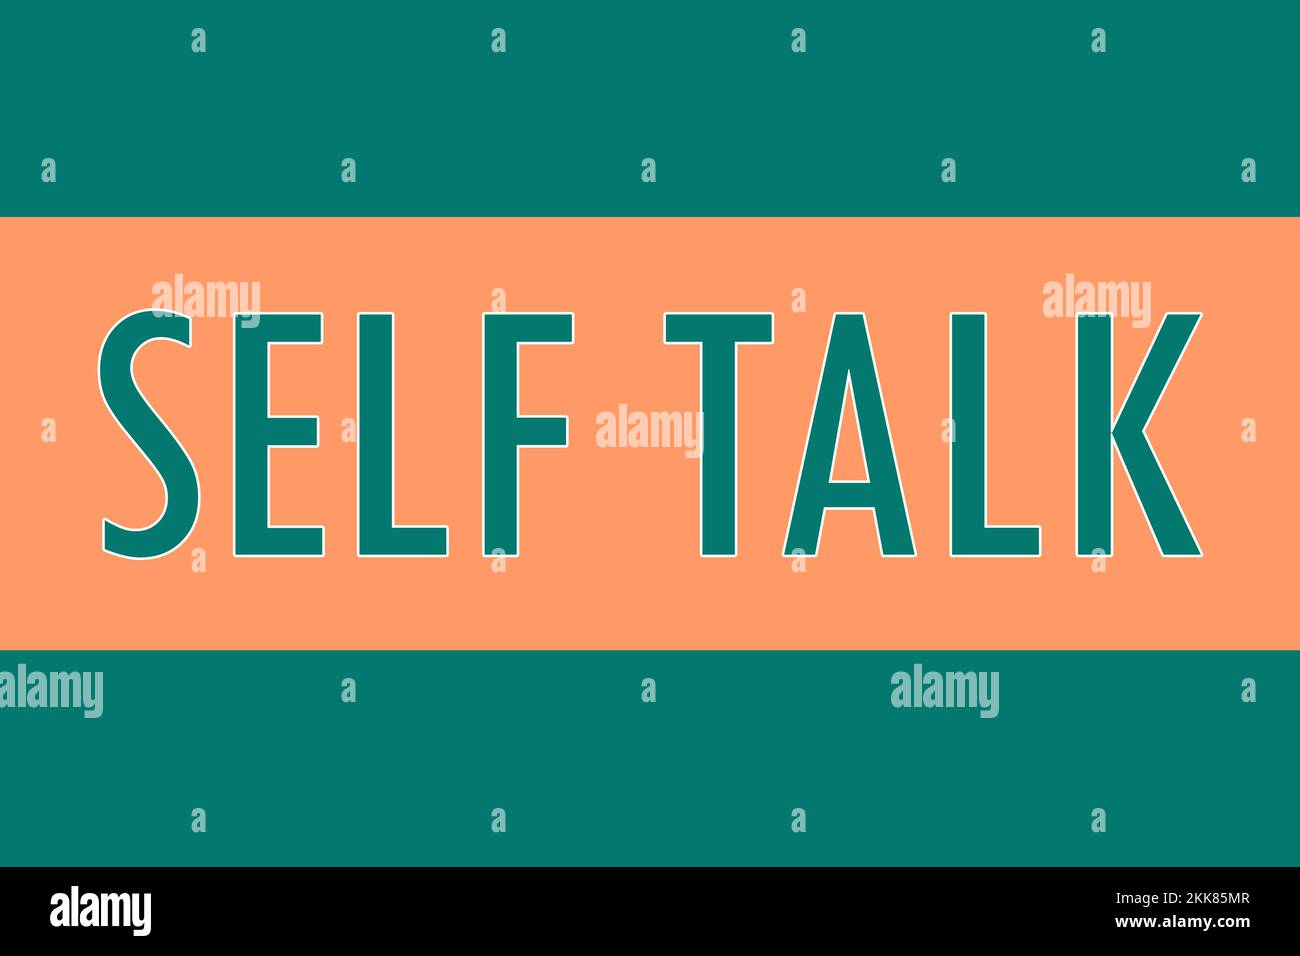 Self talk, logo. Colorful typography banner with word. Text caption, art lettering, creative colorful font. Rubric concept. Minimalistic design Stock Photo